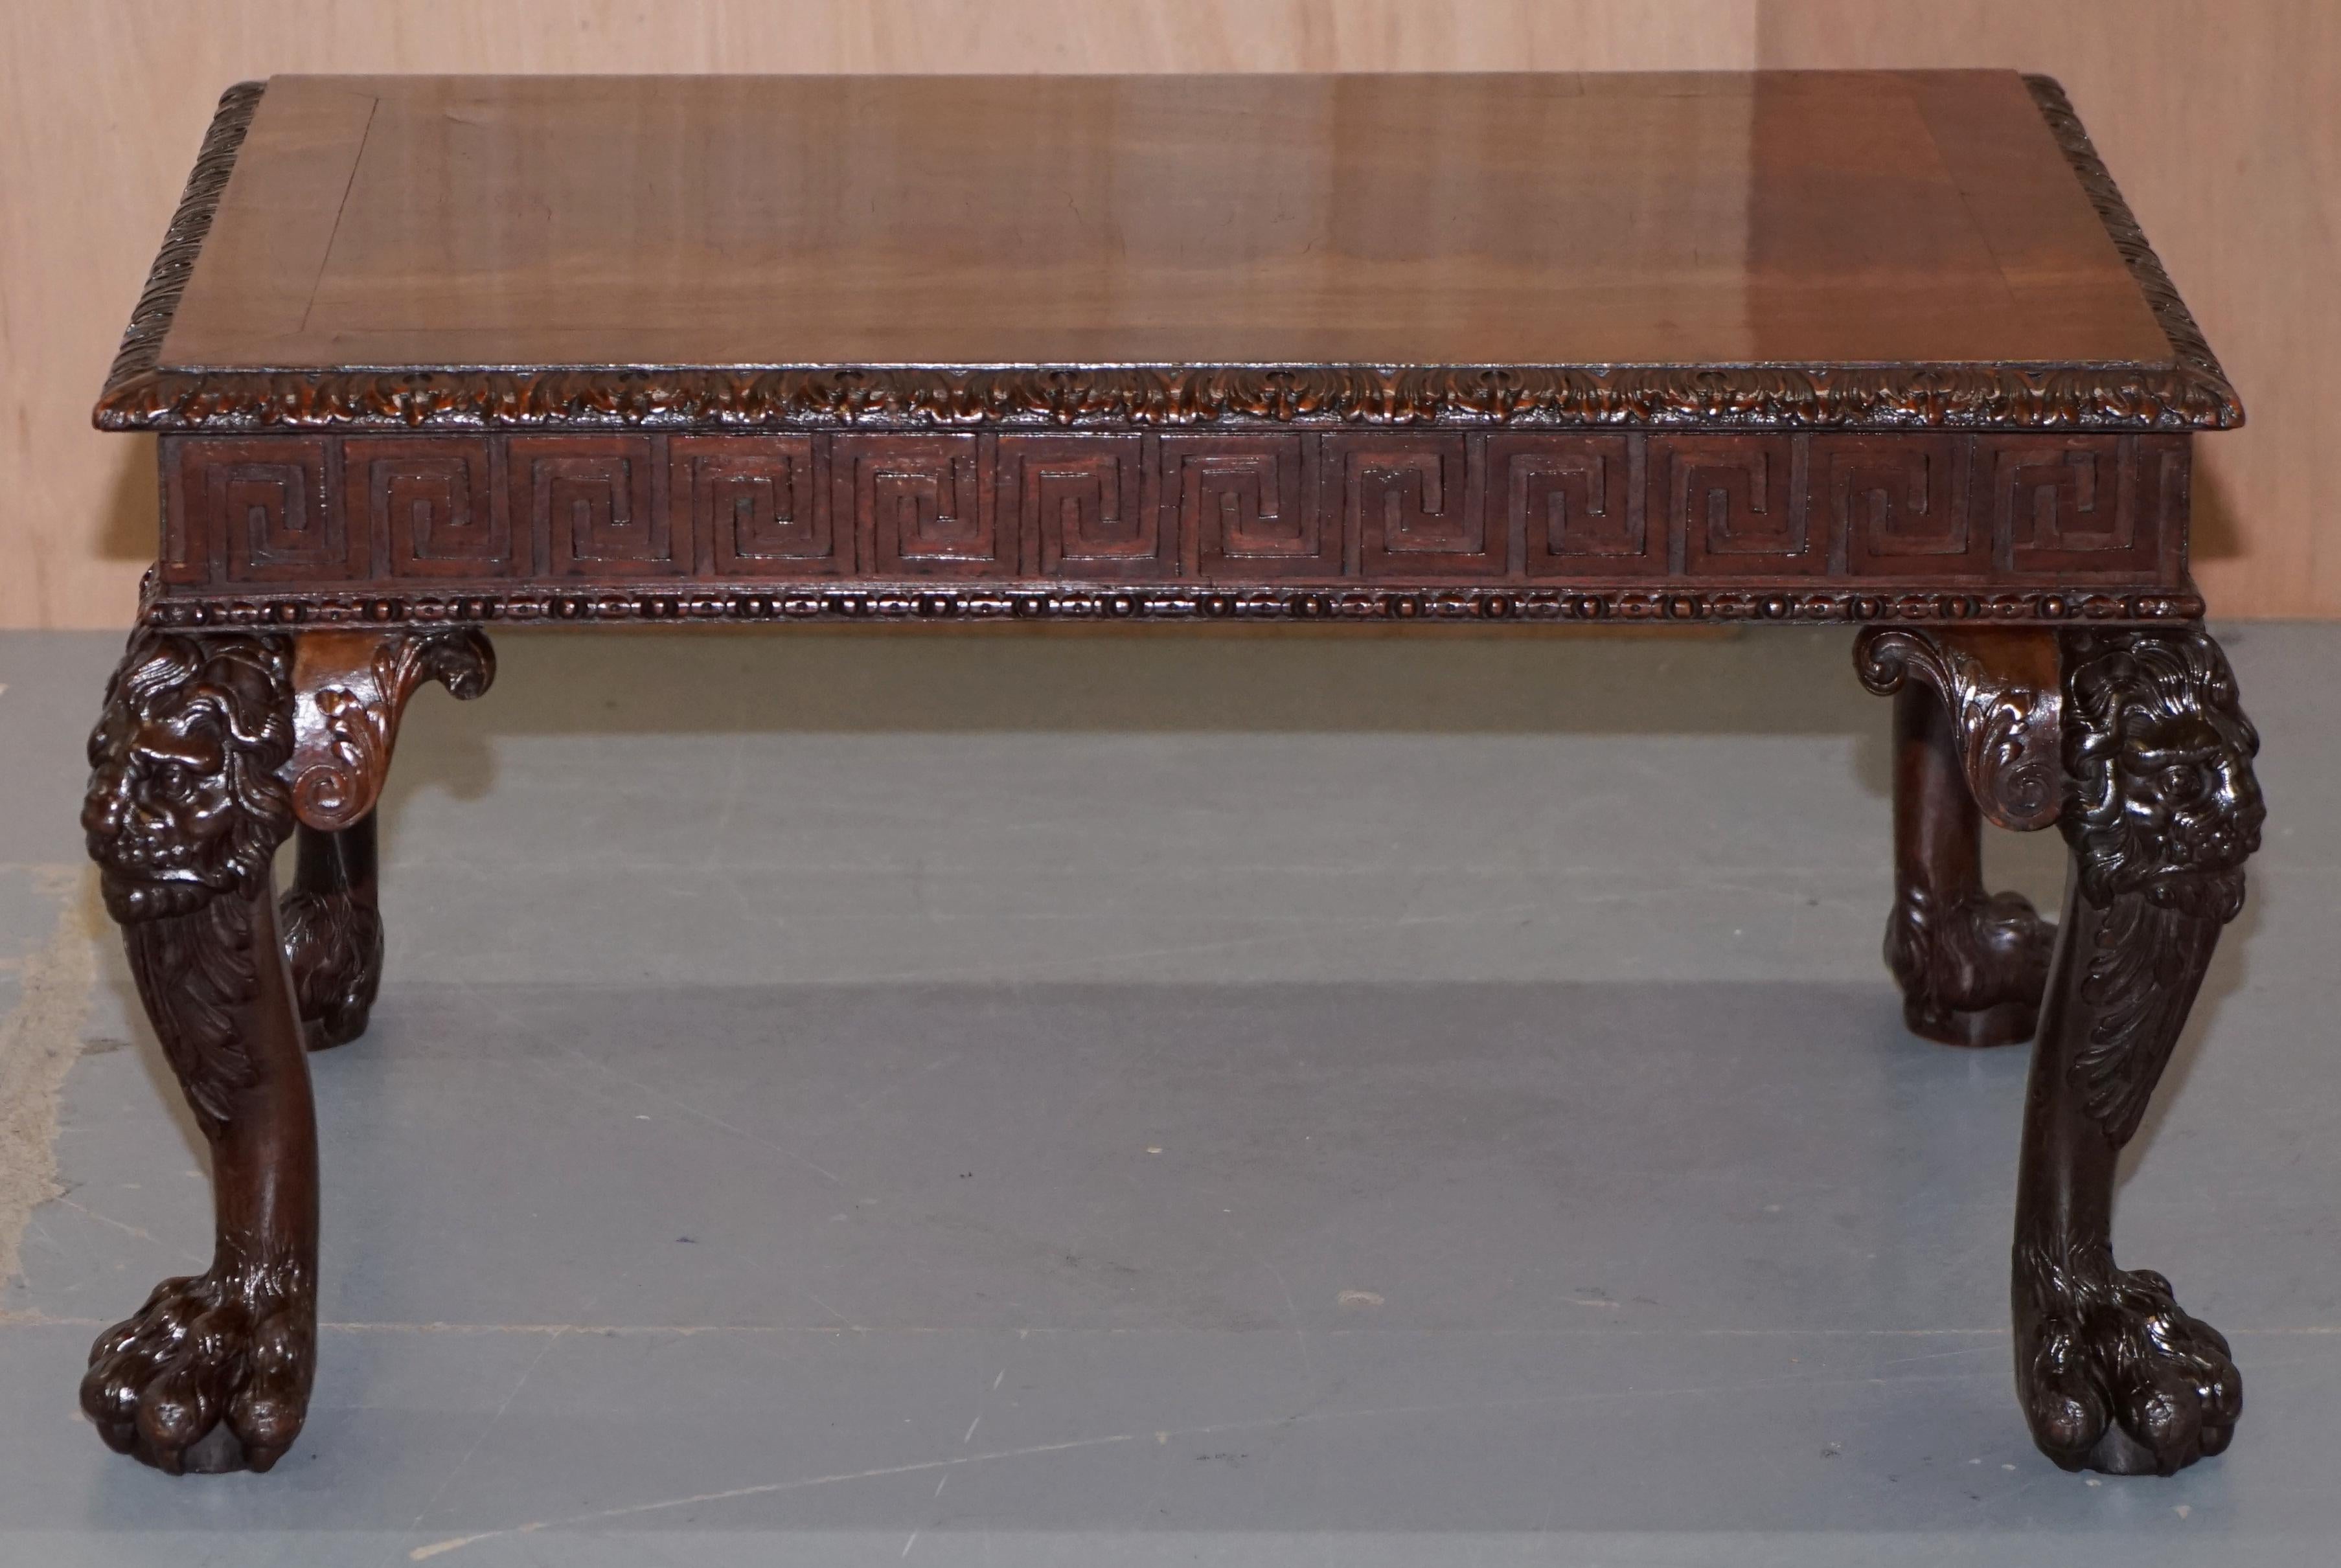 We are delighted to offer for sale this stunning and highly decorative Georgian Irish style solid mahogany low coffee table with Lion heads and hairy paw feet

A very decorative and rare little table, pieces like this I consider to be art